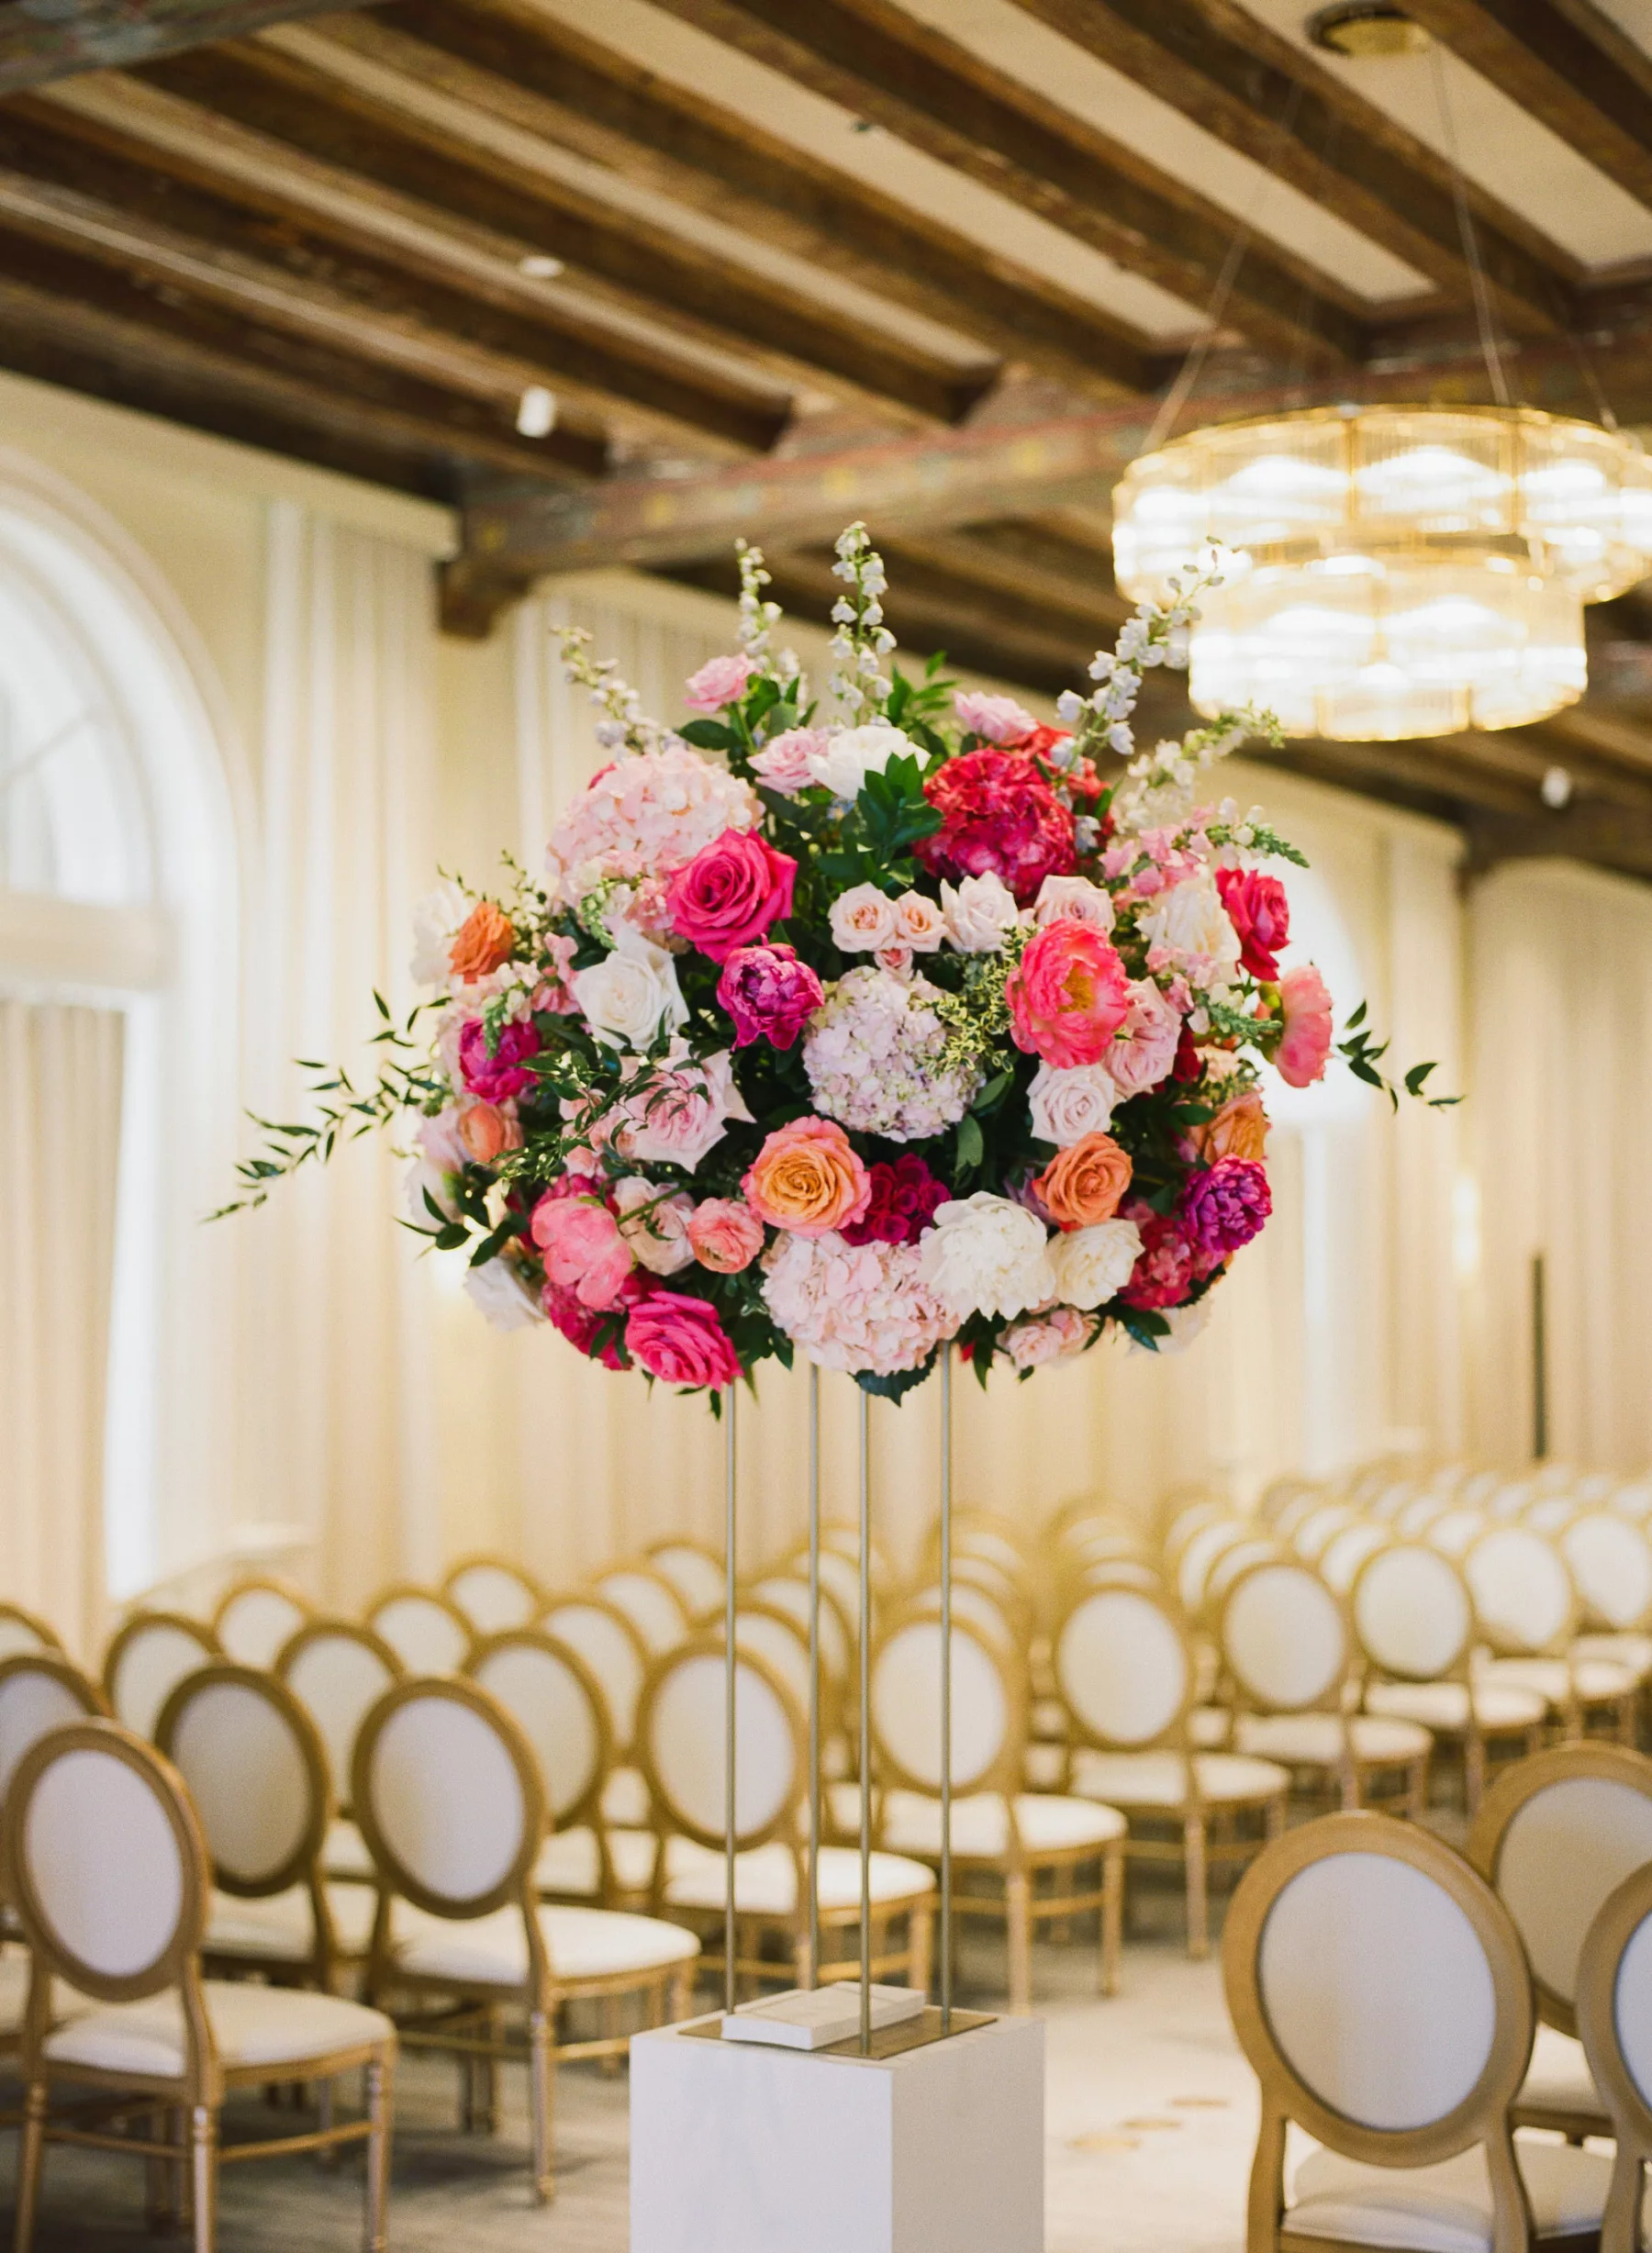 Luxurious Summer Ballroom Wedding Ceremony Aisle Decor | Tall Flower Stand with Pink Anemones and Hydrangeas, Orange Garden Roses, Blue Stock Flowers | Gold and White Chairs | Tampa Bay Florist Bruce Wayne Florals | Kate Ryan Event Rentals